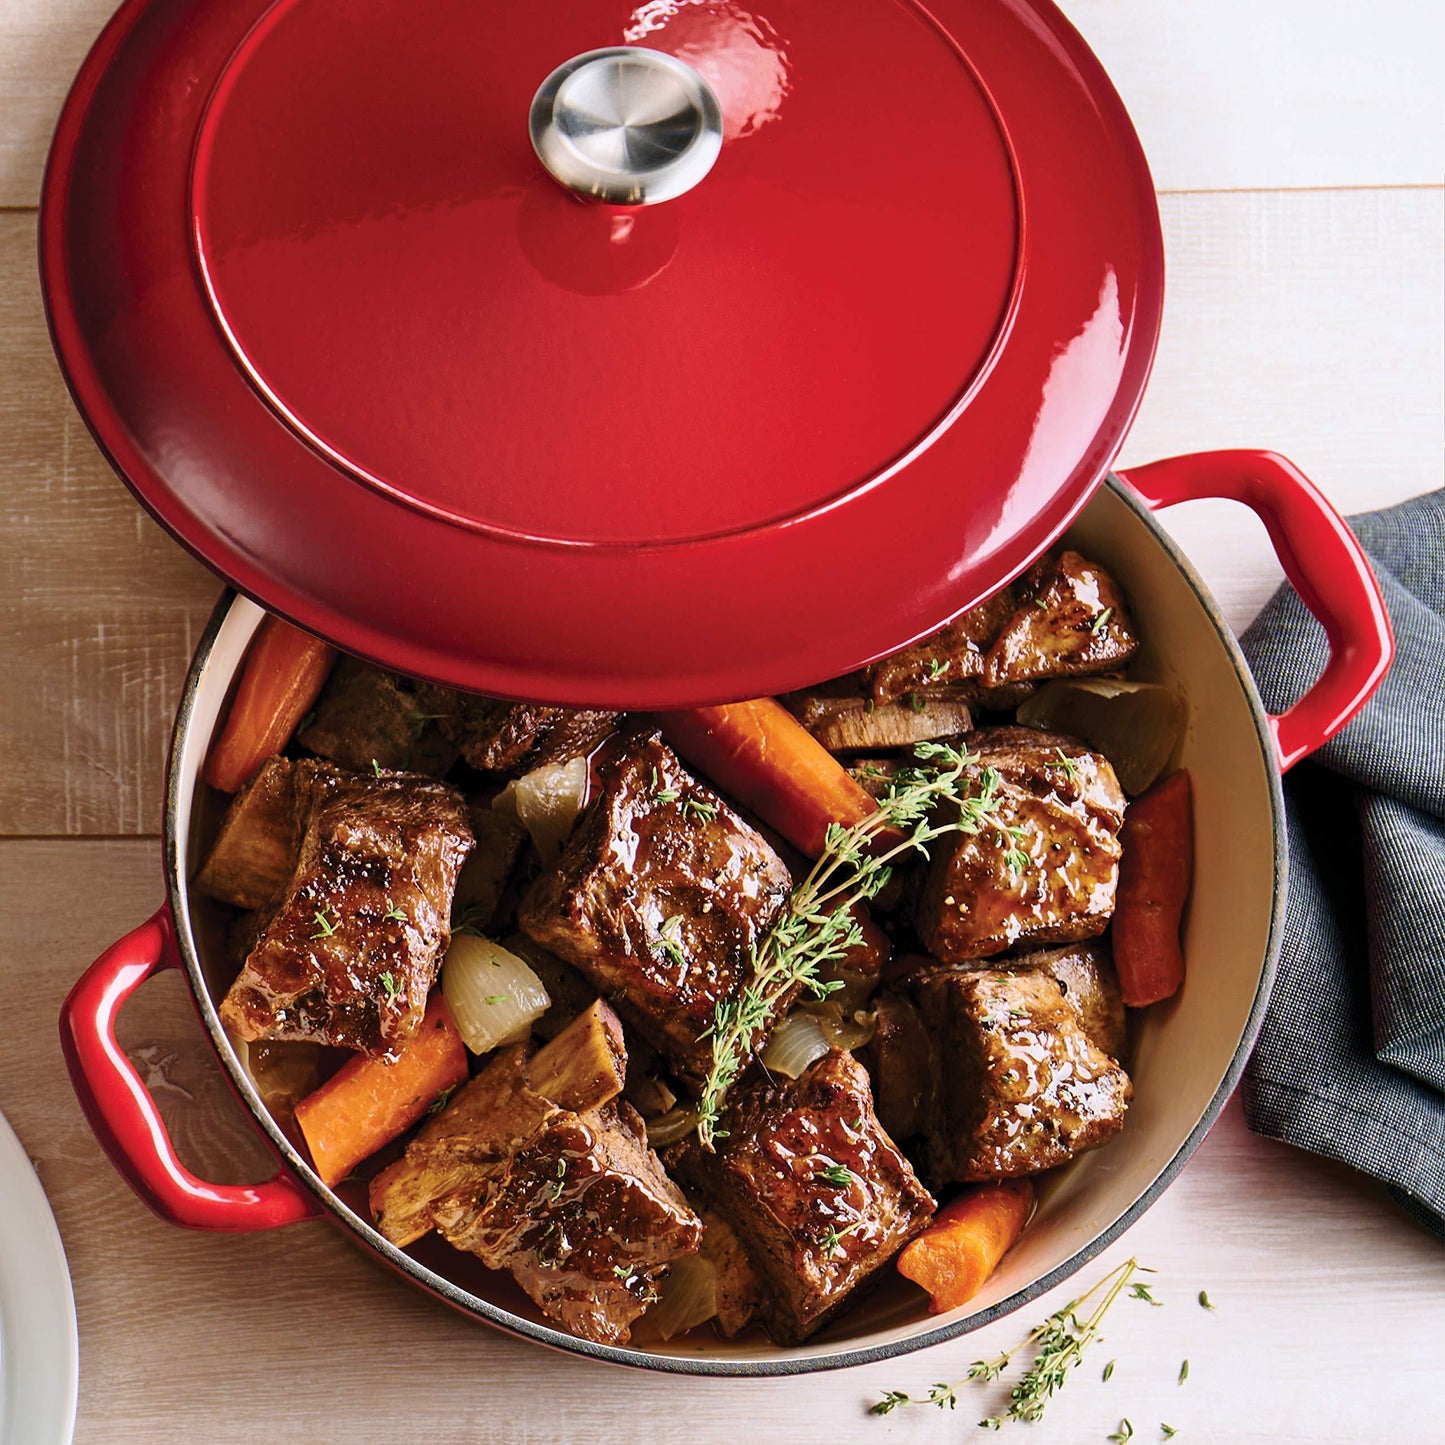 Tramontina Covered Round Dutch Oven Enameled Cast Iron 5.5-Quart Gradated Red, 80131/047DS - CookCave